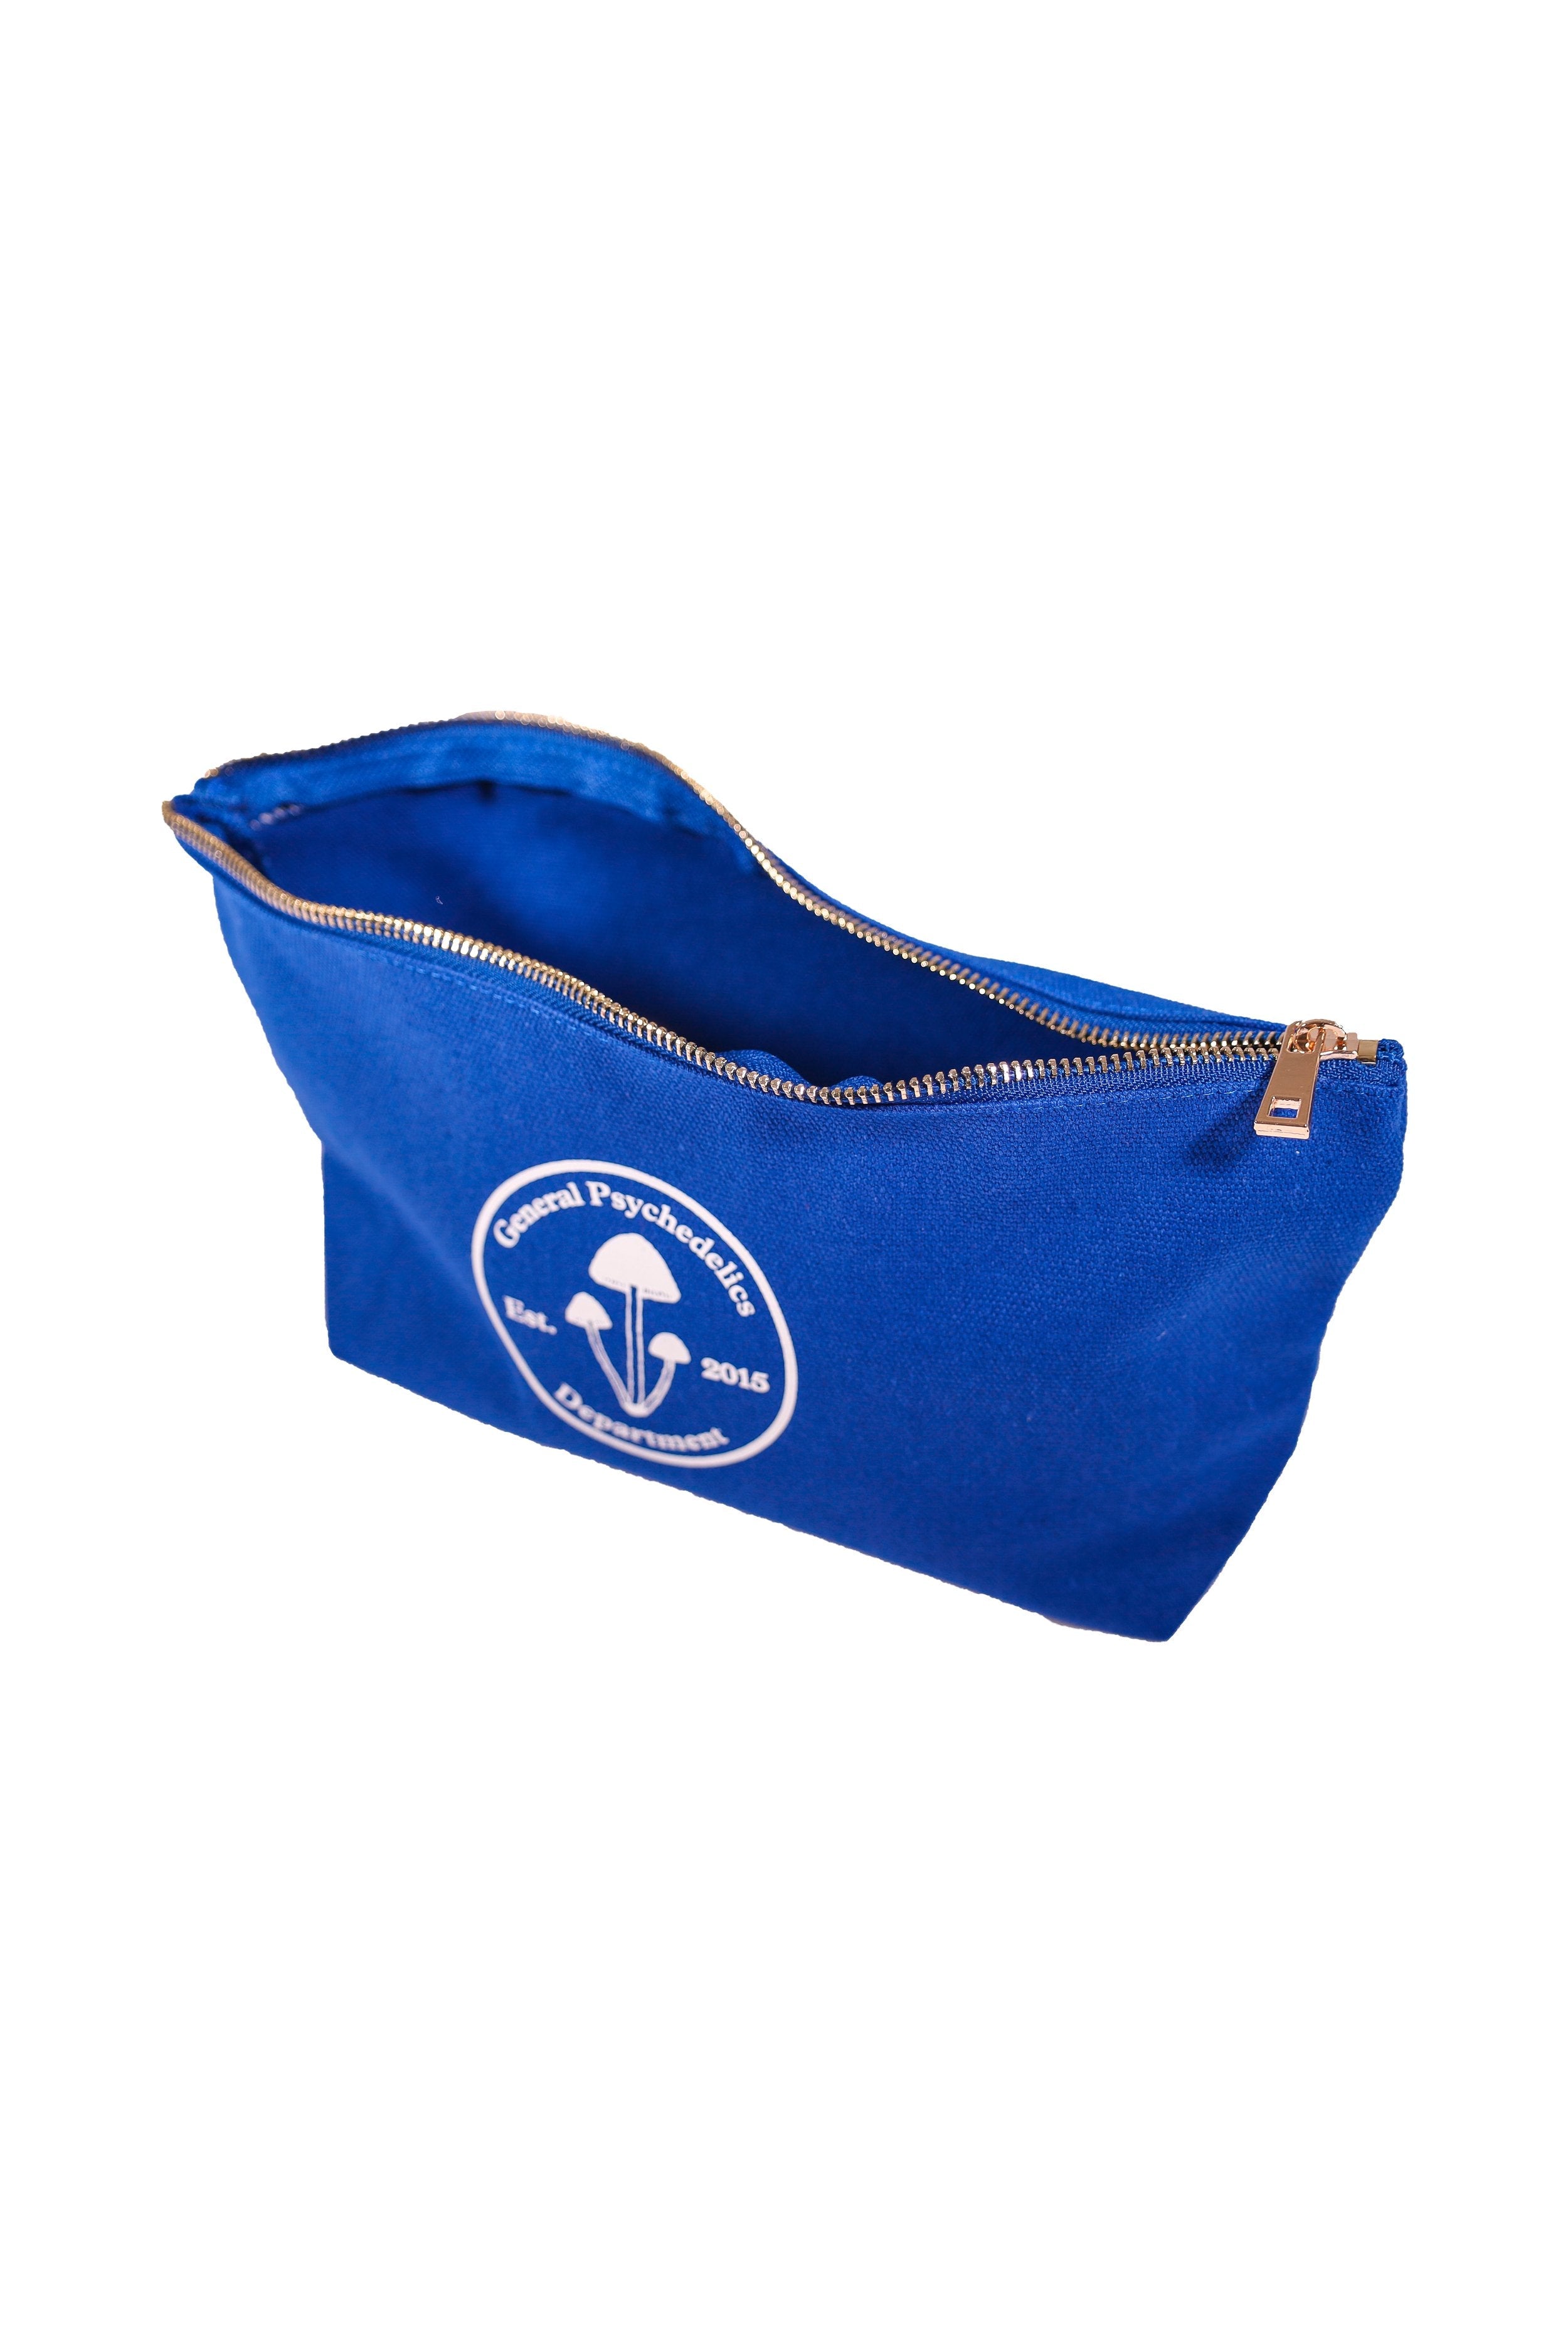 General Psychedelic Department Tool Bag - Blue-Mister Green-Mister Green